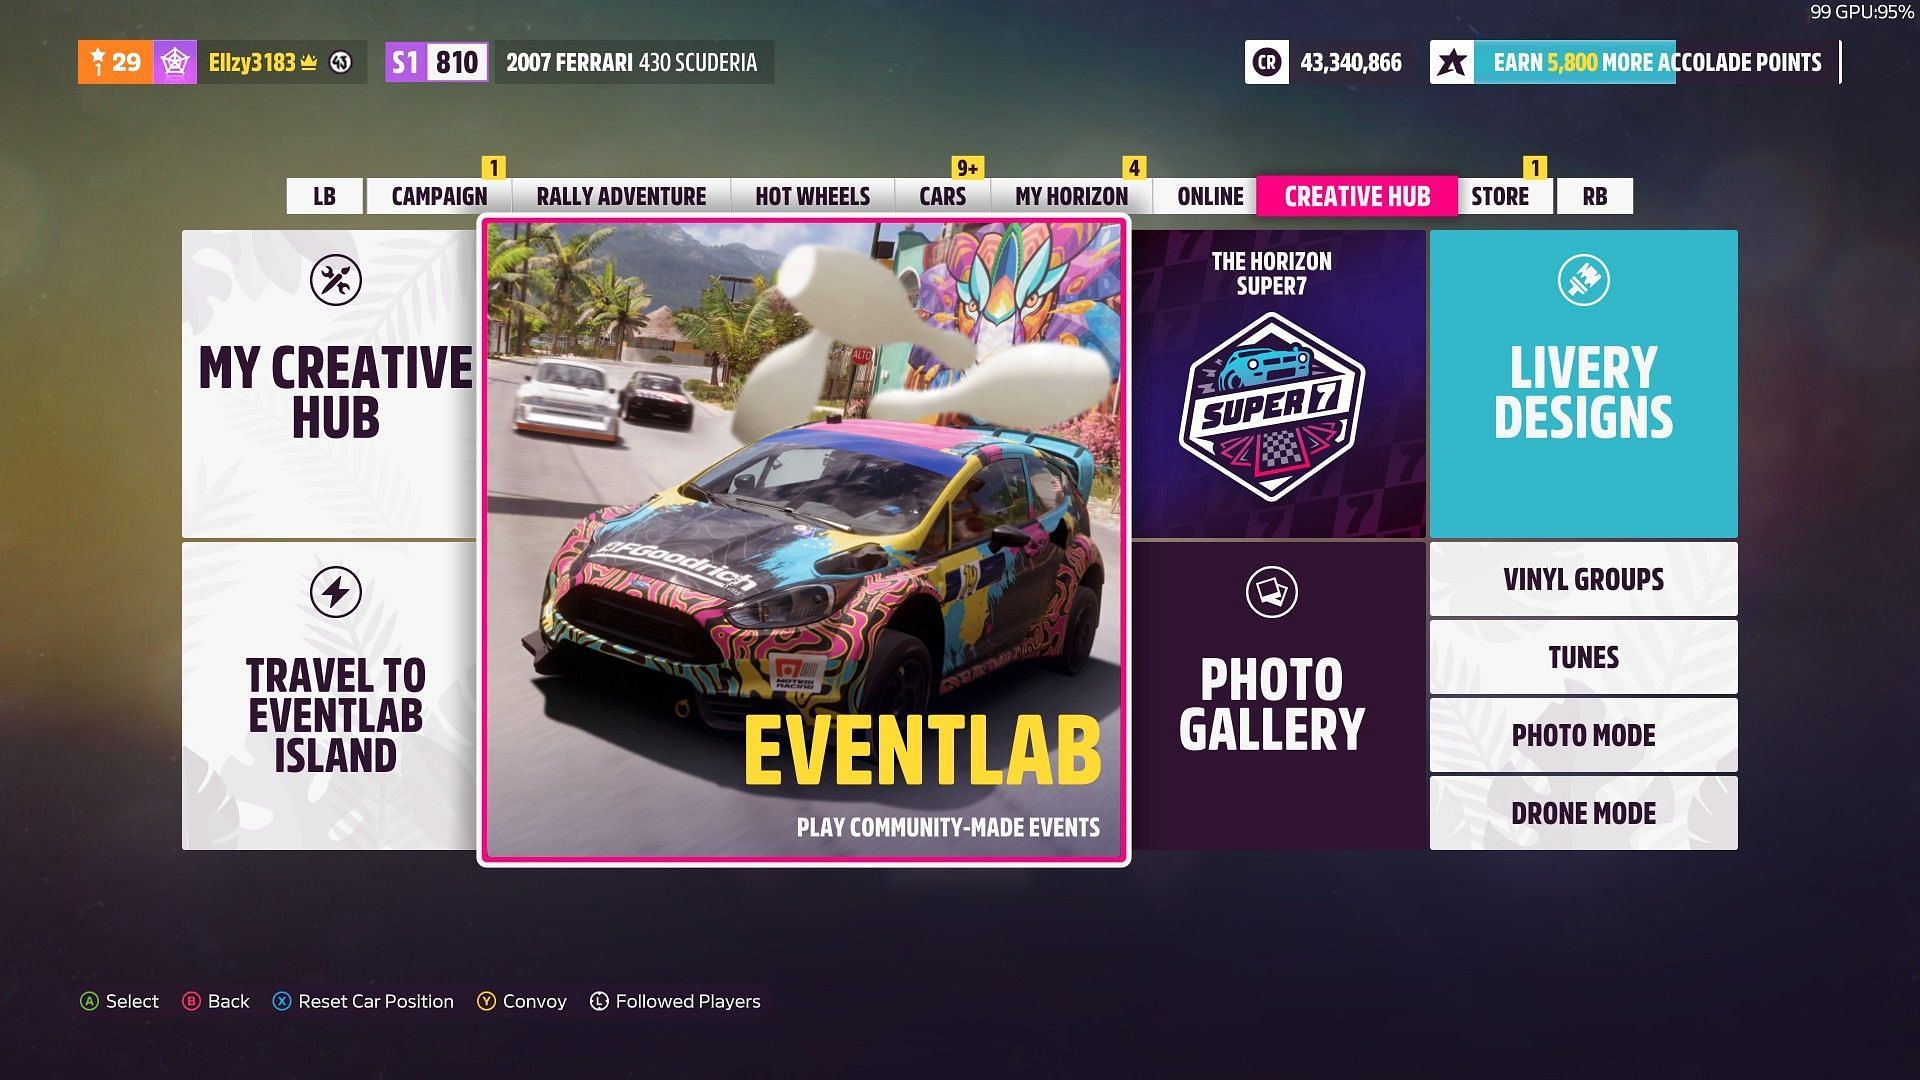 The Eventlab feature of Horizon has proven to be a key factor in keeping the game fresh with the incorporation of community with the game. (Image via Playground Games)